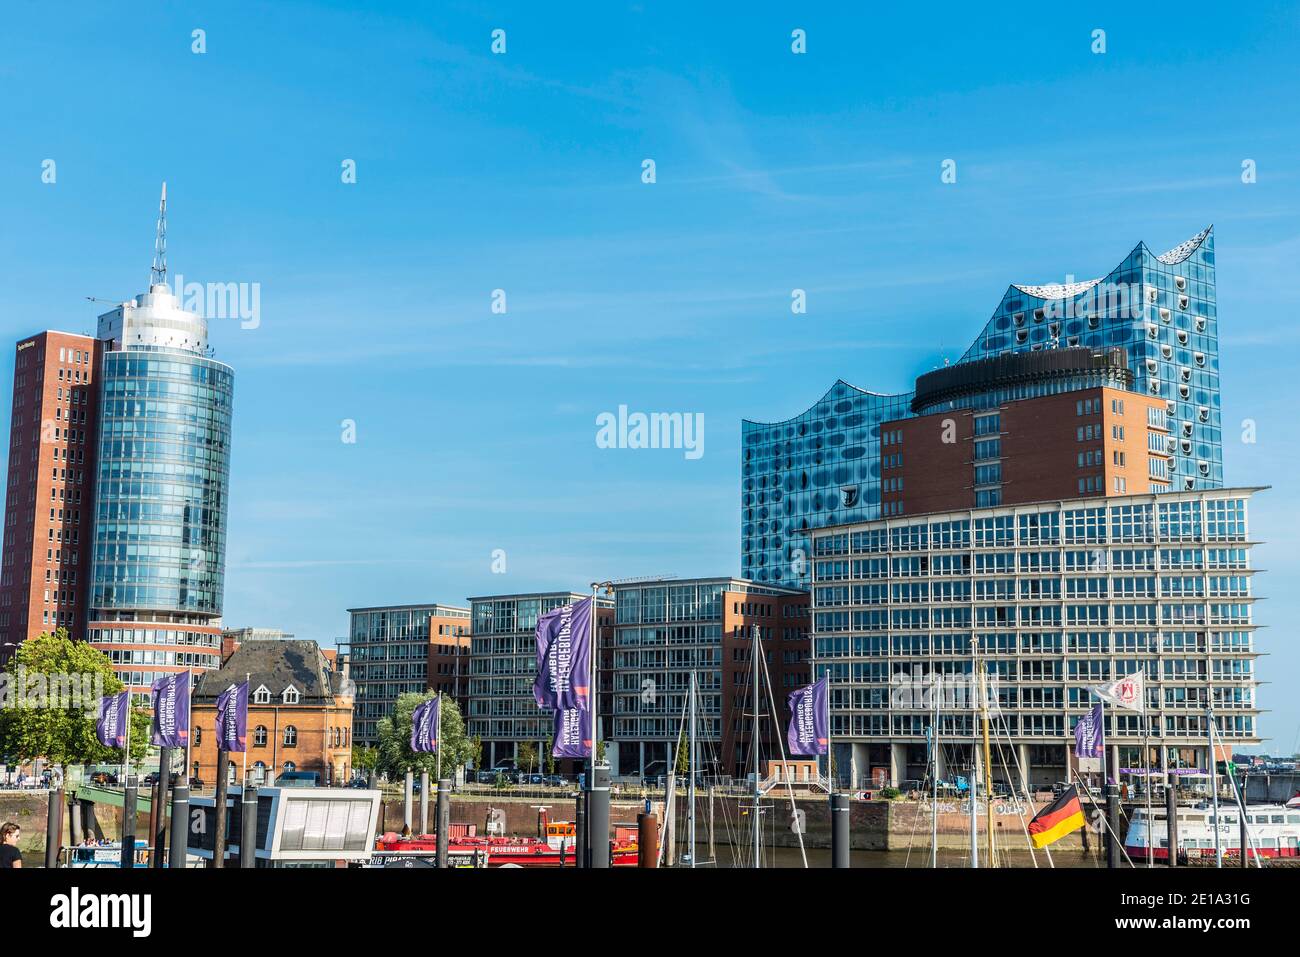 Hamburg, Germany - August 22, 2019: View of the Hanseatic Trade Center (HTC), Columbus Haus and the Elbphilharmonie (Elbe Philharmonic Hall) in HafenC Stock Photo